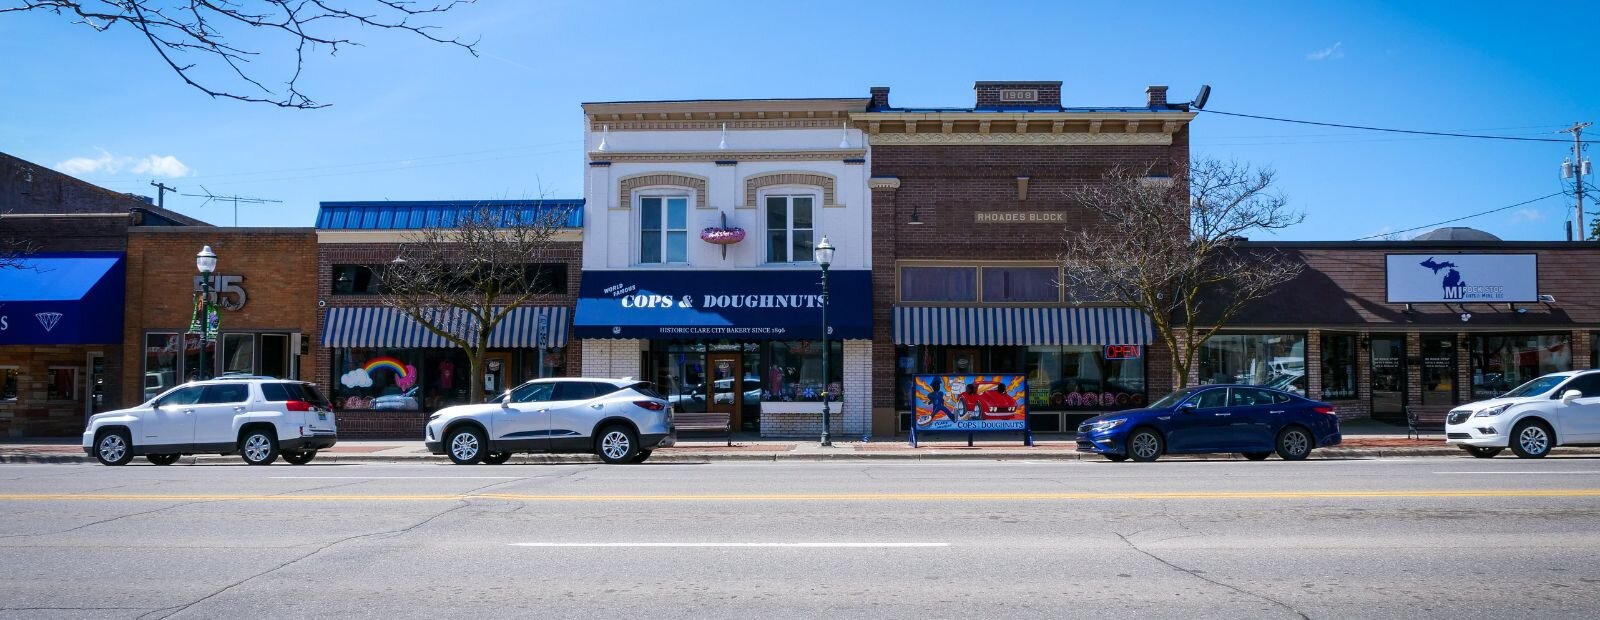 Downtown Clare boasts both flagship storefronts such as Cops & Doughnuts, as well as newcomers like Calla Lily Mercantile, whose retail shop opened less than three years ago.